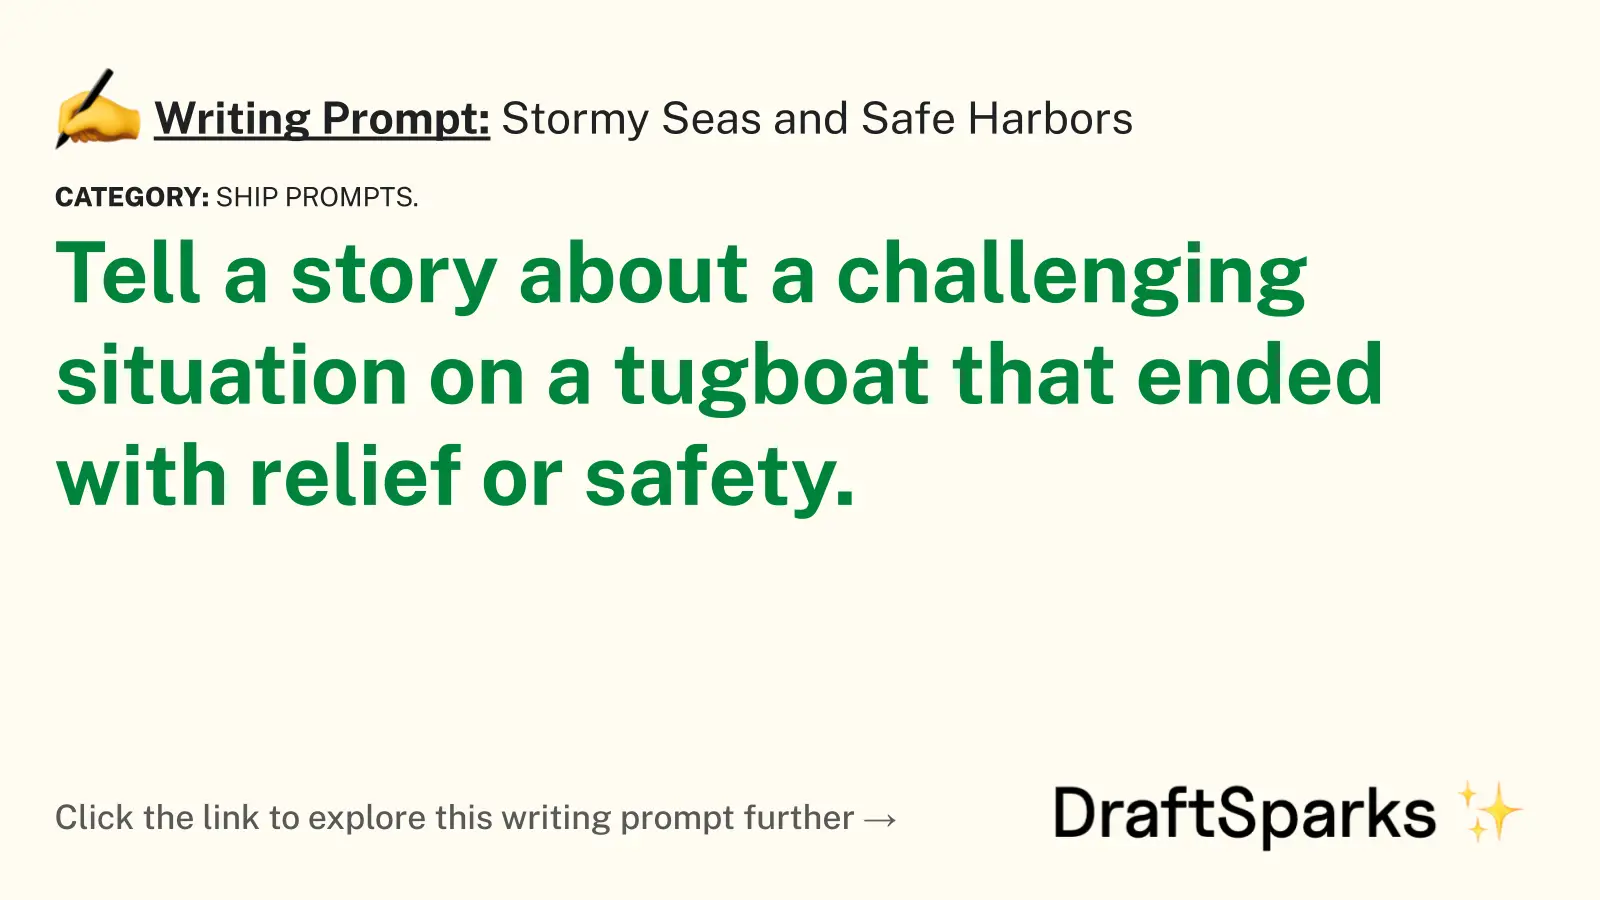 Stormy Seas and Safe Harbors